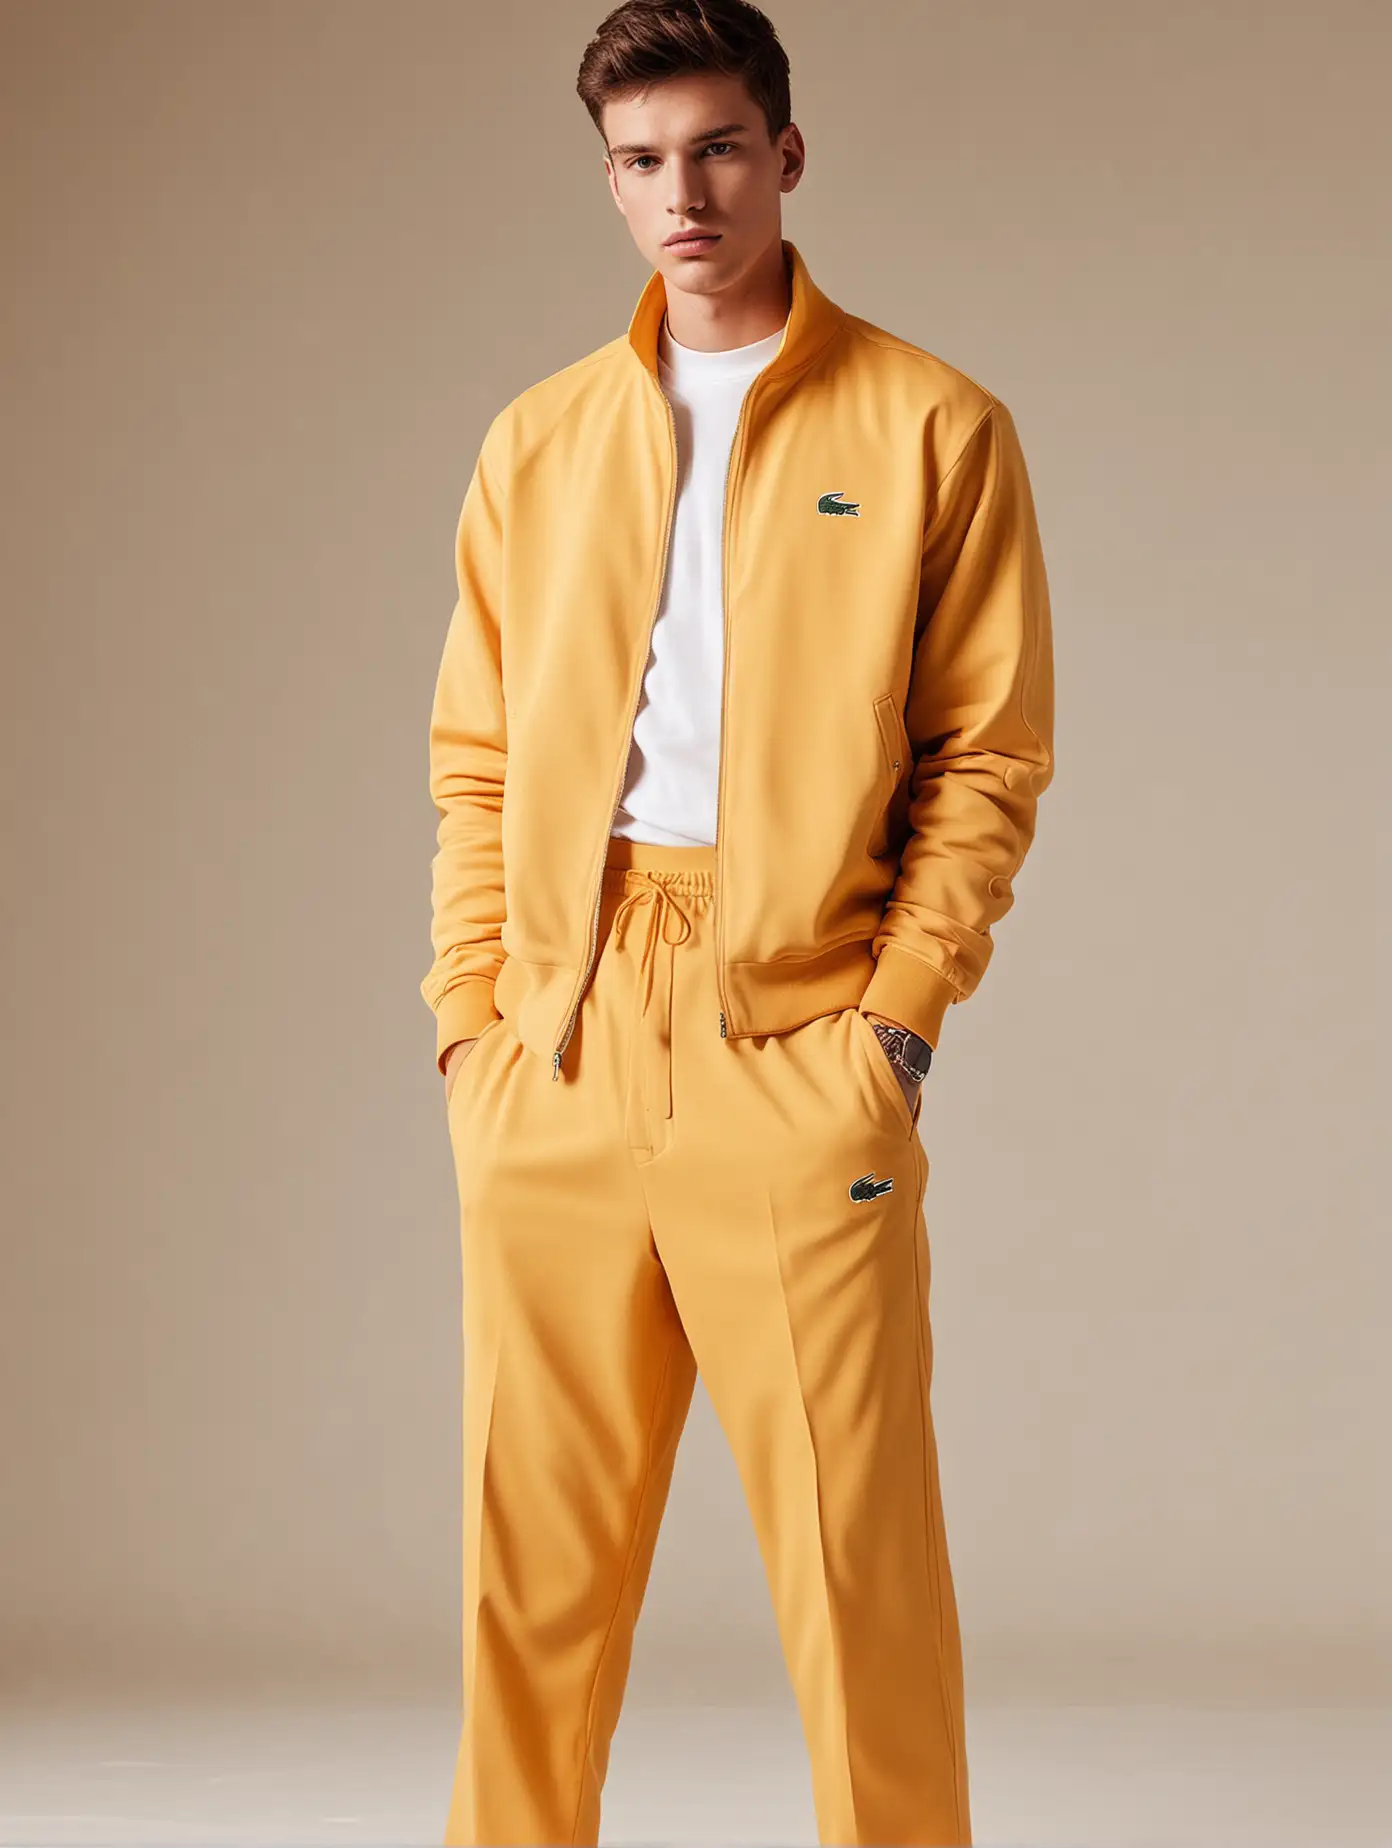 male model wearing Lacoste tracksuits, the pants are wide and straight, tracksuit has patterns on both jacket and pants, placed in huge bright luxury photo studio, sandy colors